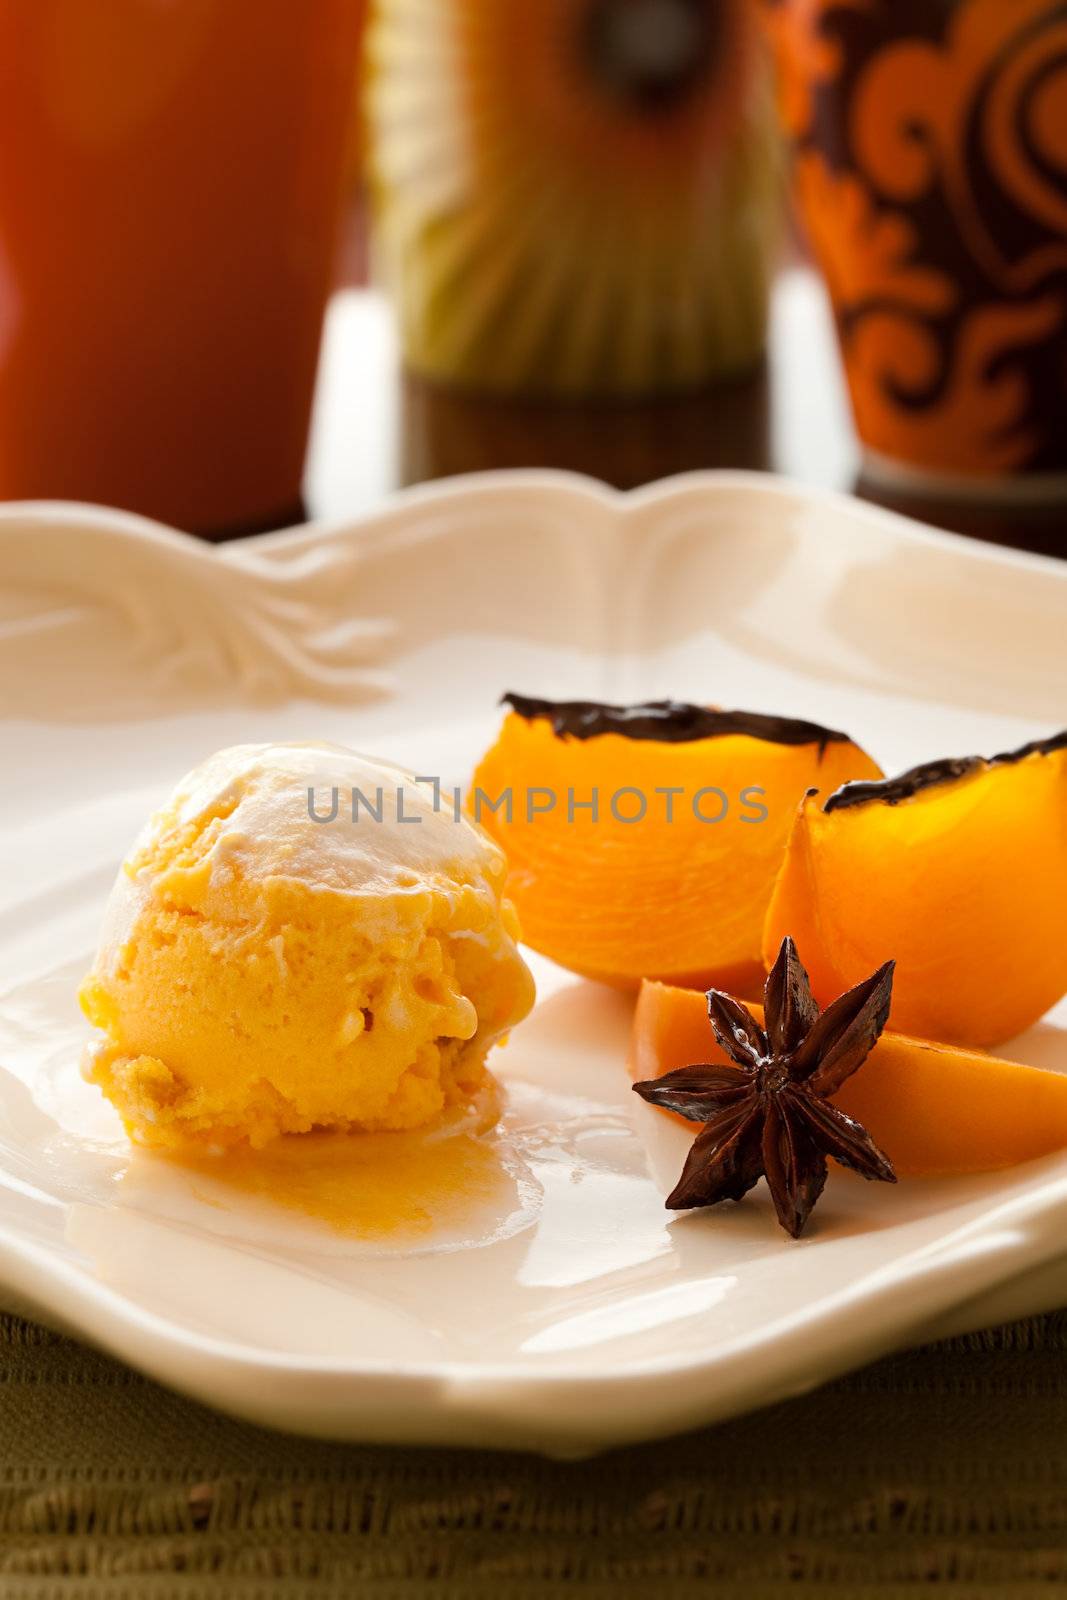 Ice cream and persimmon by Gravicapa